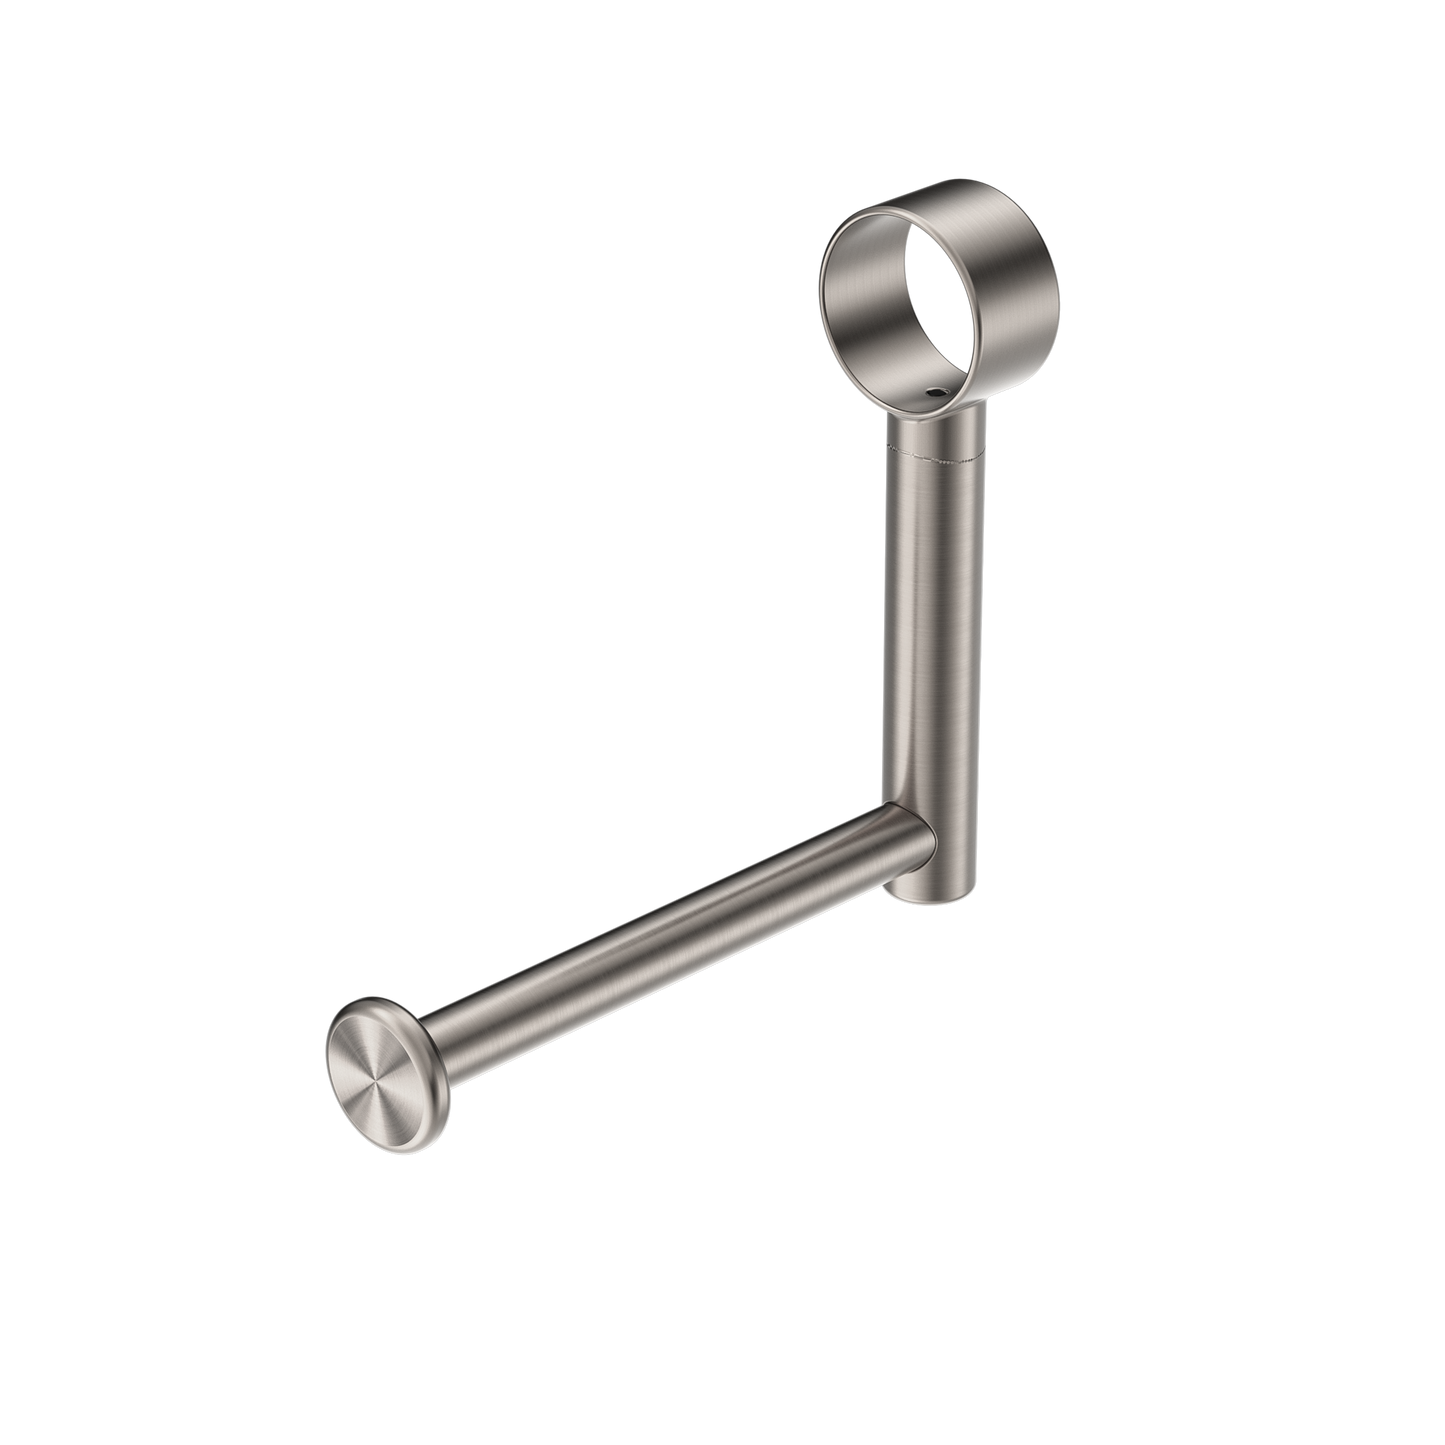 CALIBRE MECCA  Add on TOILET ROLL HOLDER BRUSHED NICKEL